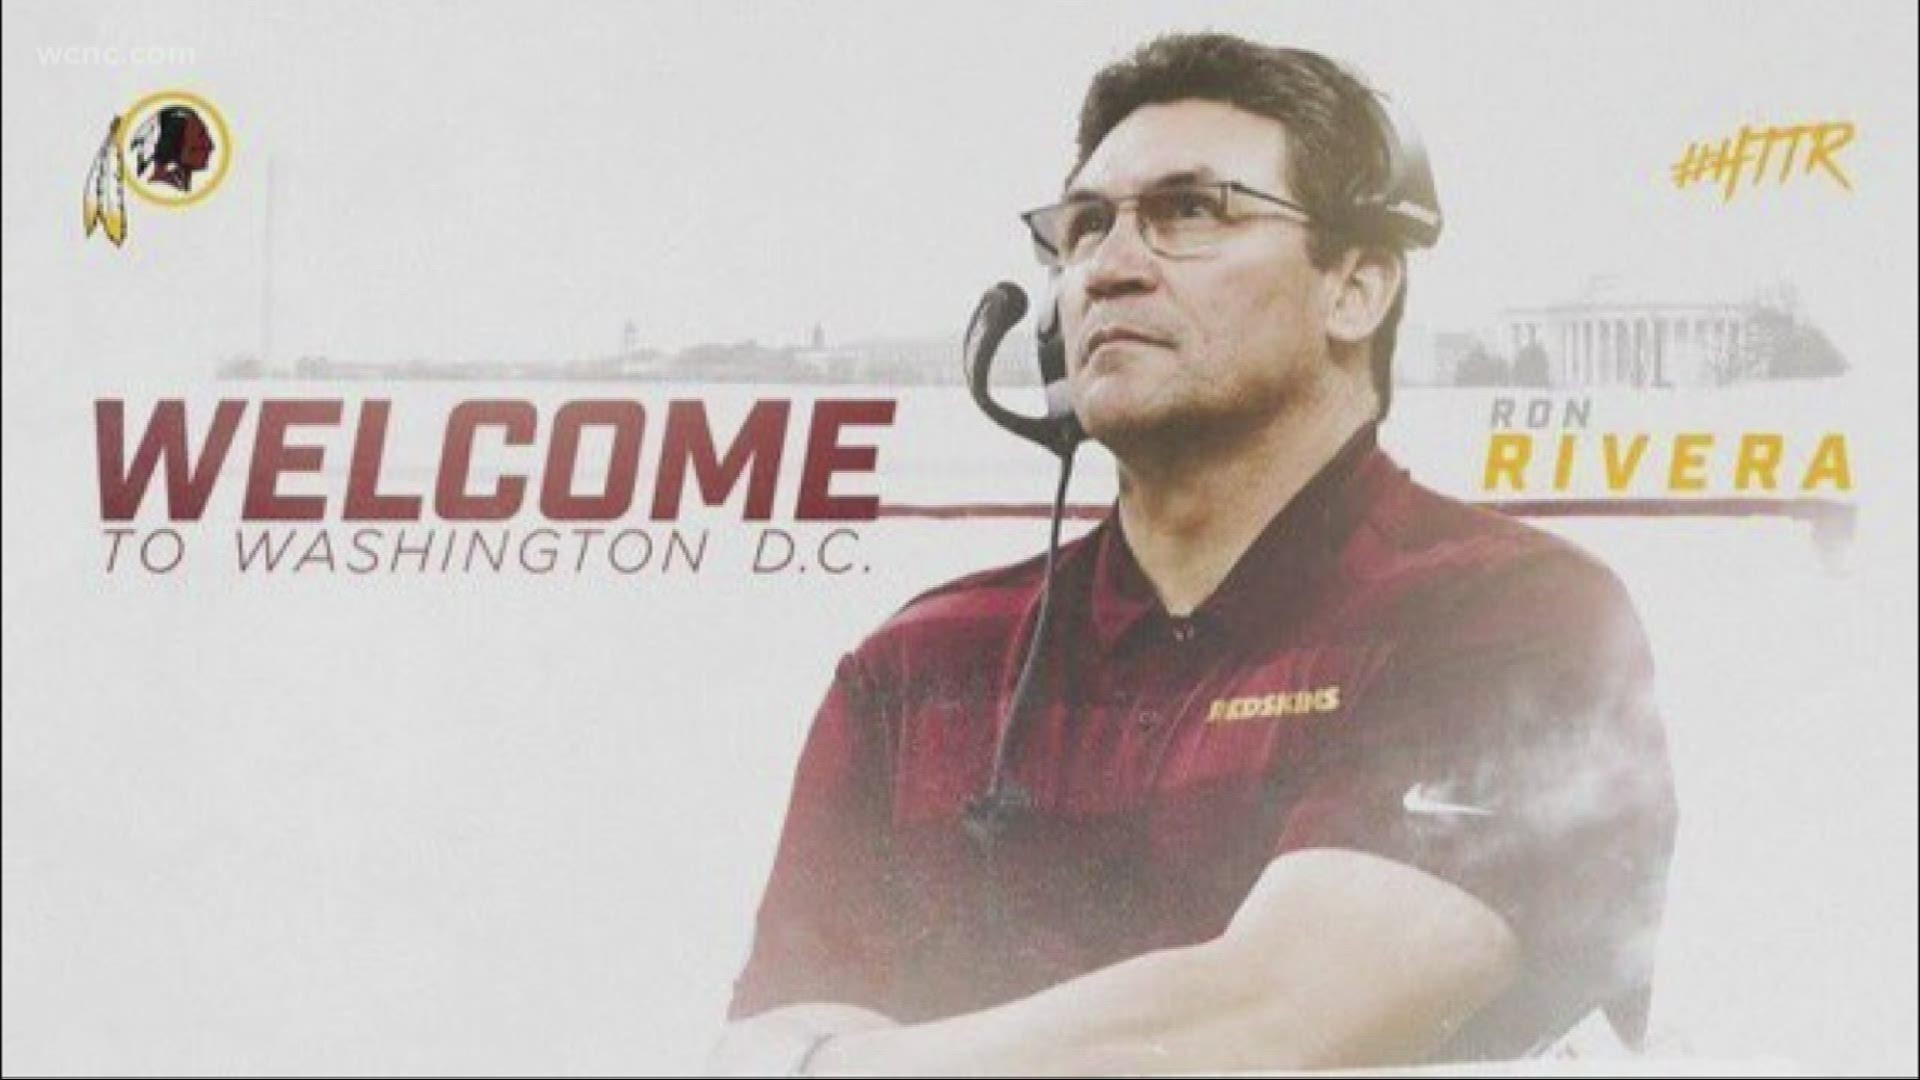 Less than one month after Rivera was fired by the Carolina Panthers, he was announced as the new coach of the Washington Redskins.